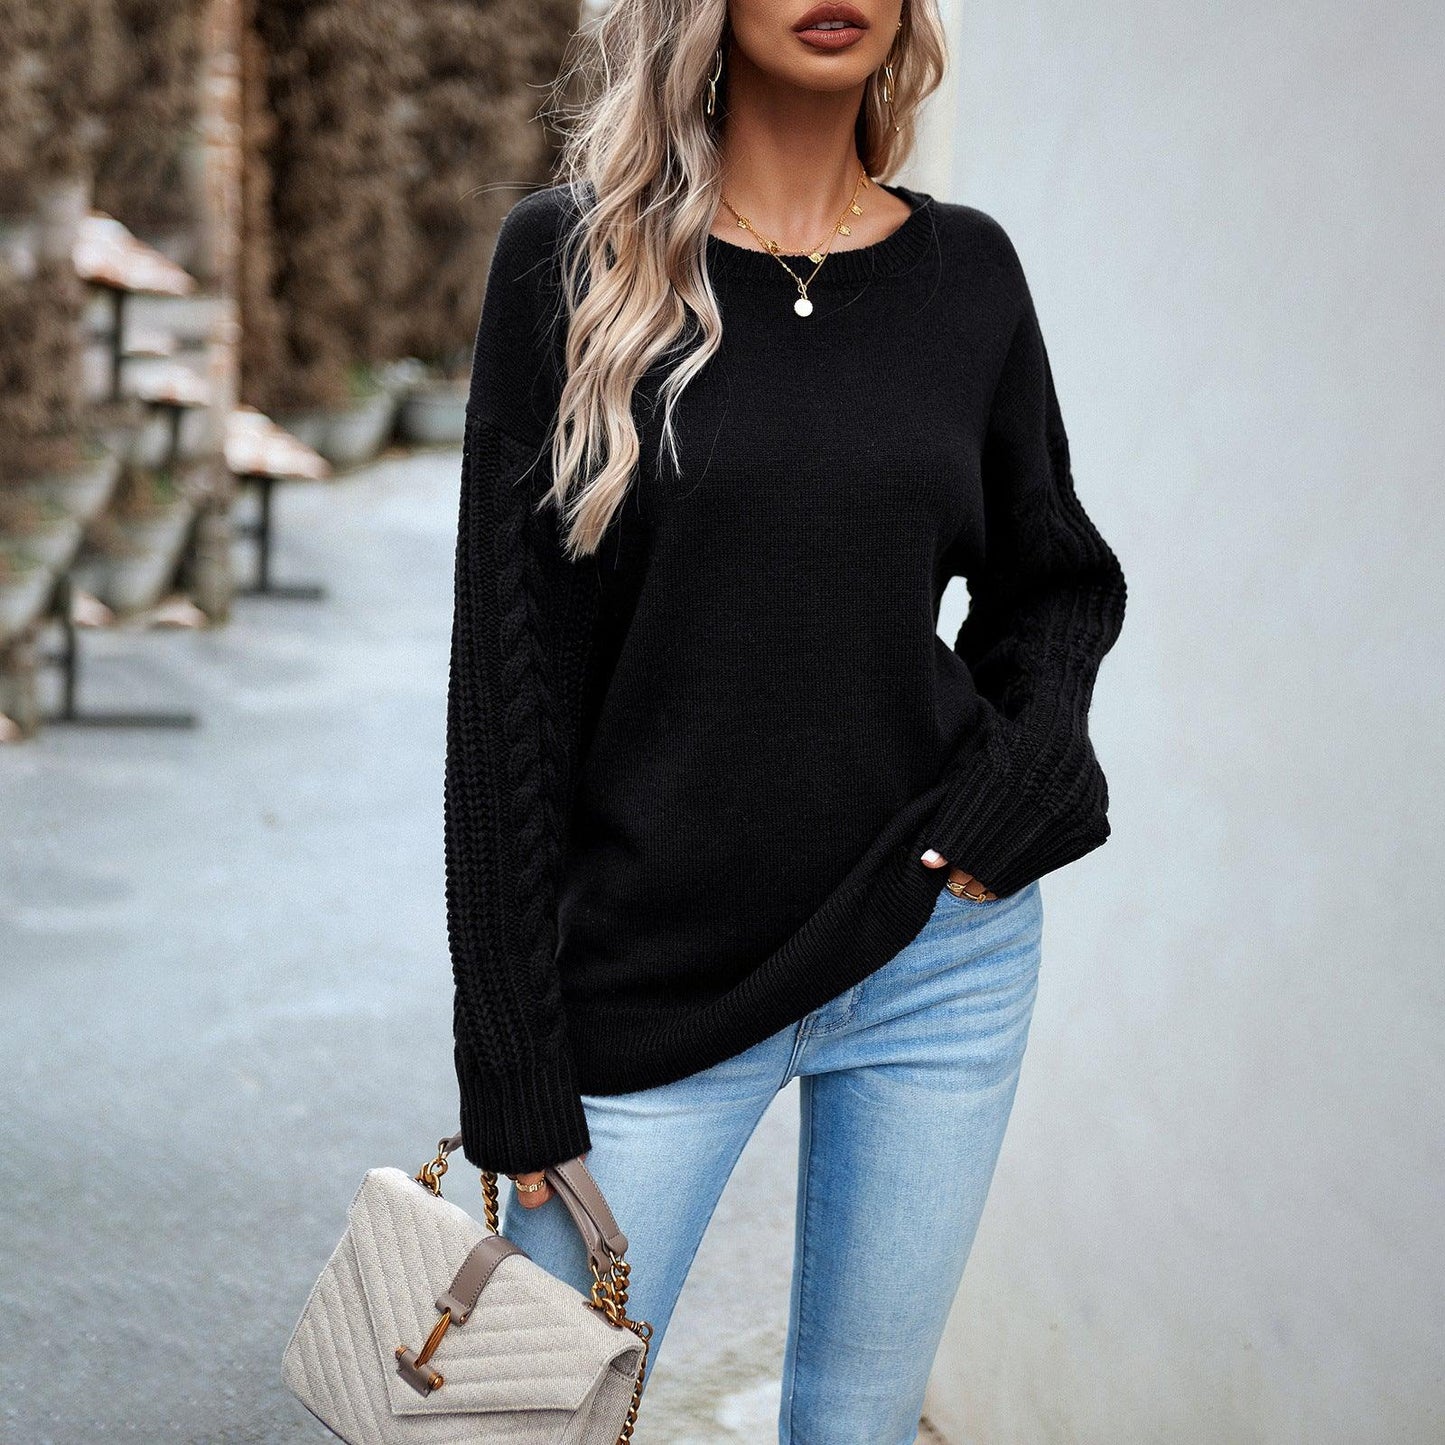 Women's Fashionable Simple Round Neck Sweater winter clothes for women